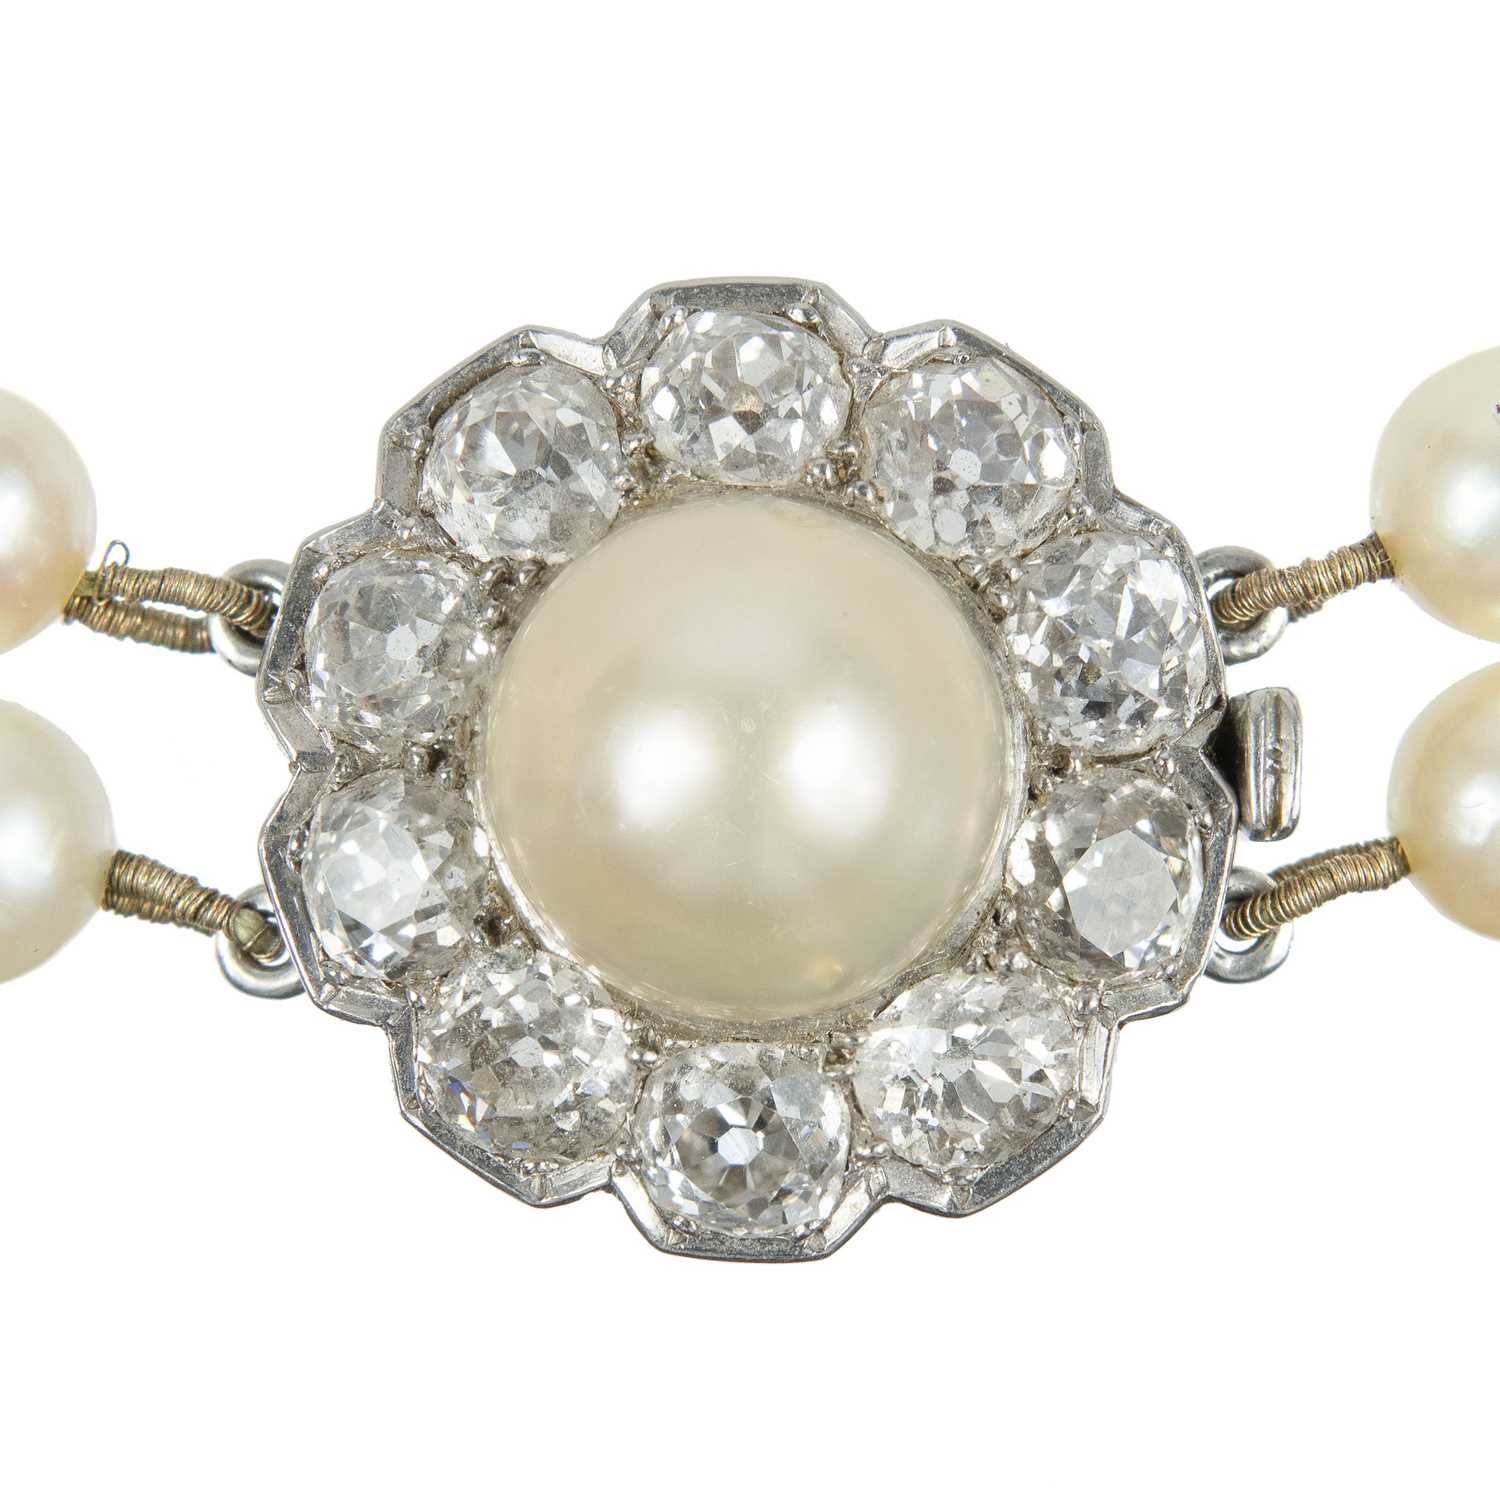 An impressive early 20th century cultured pearl, diamond set, double-row necklace & earrings suite. - Image 7 of 9